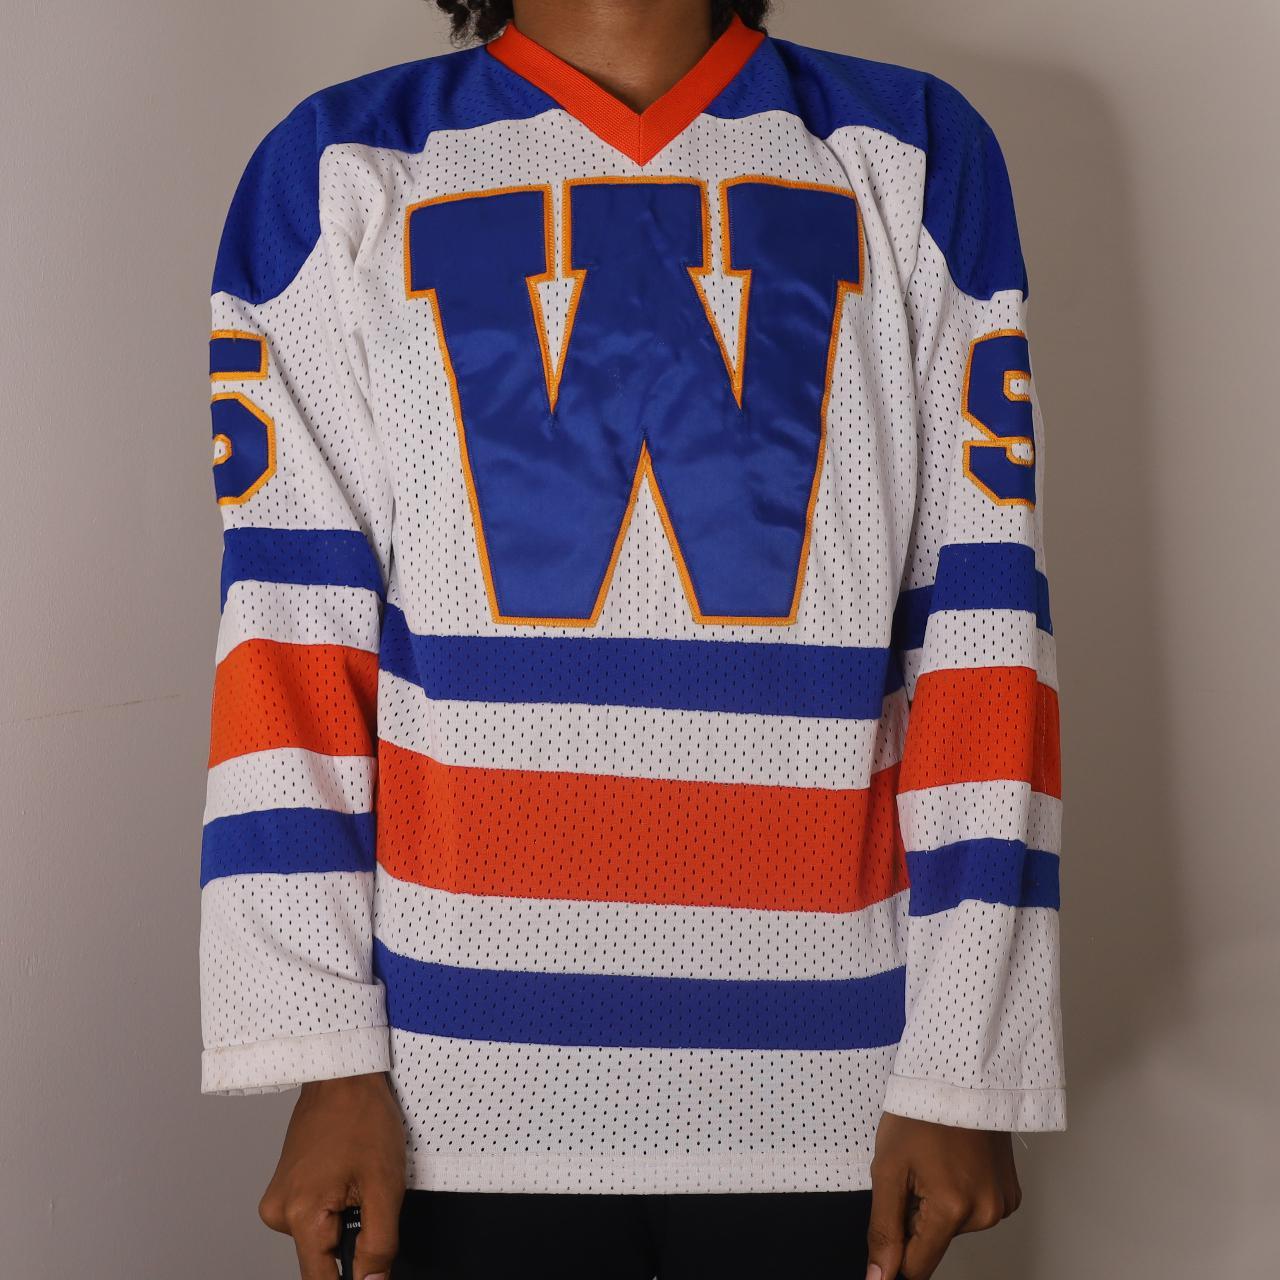 South Pole Hockey Jersey blue with white lettering. - Depop